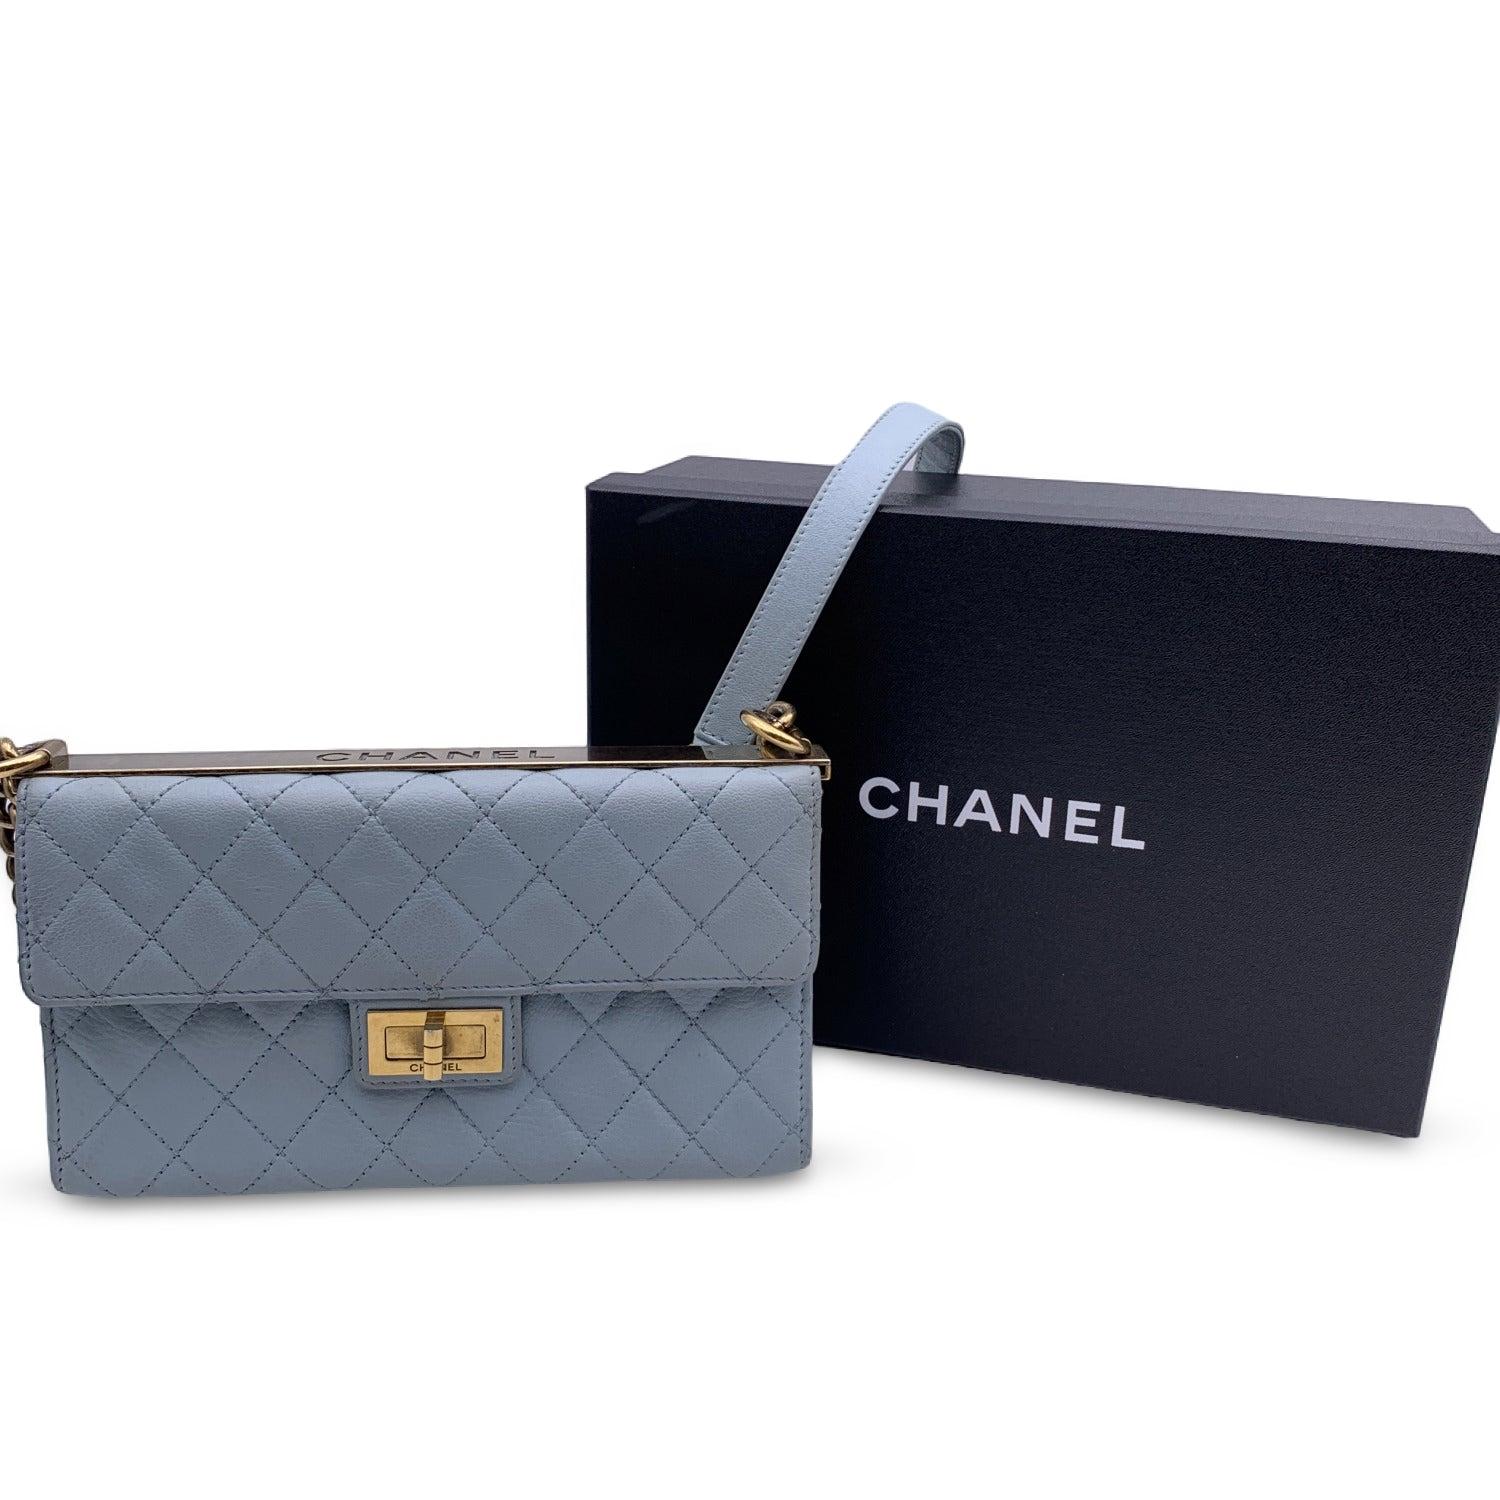 This beautiful Bag will come with a Certificate of Authenticity provided by Entrupy. The certificate will be provided at no further cost. Beautiful Chanel 'Trendy Reissue' Shoulder Bag. It is crafted of light blue leather with diamond quilting.